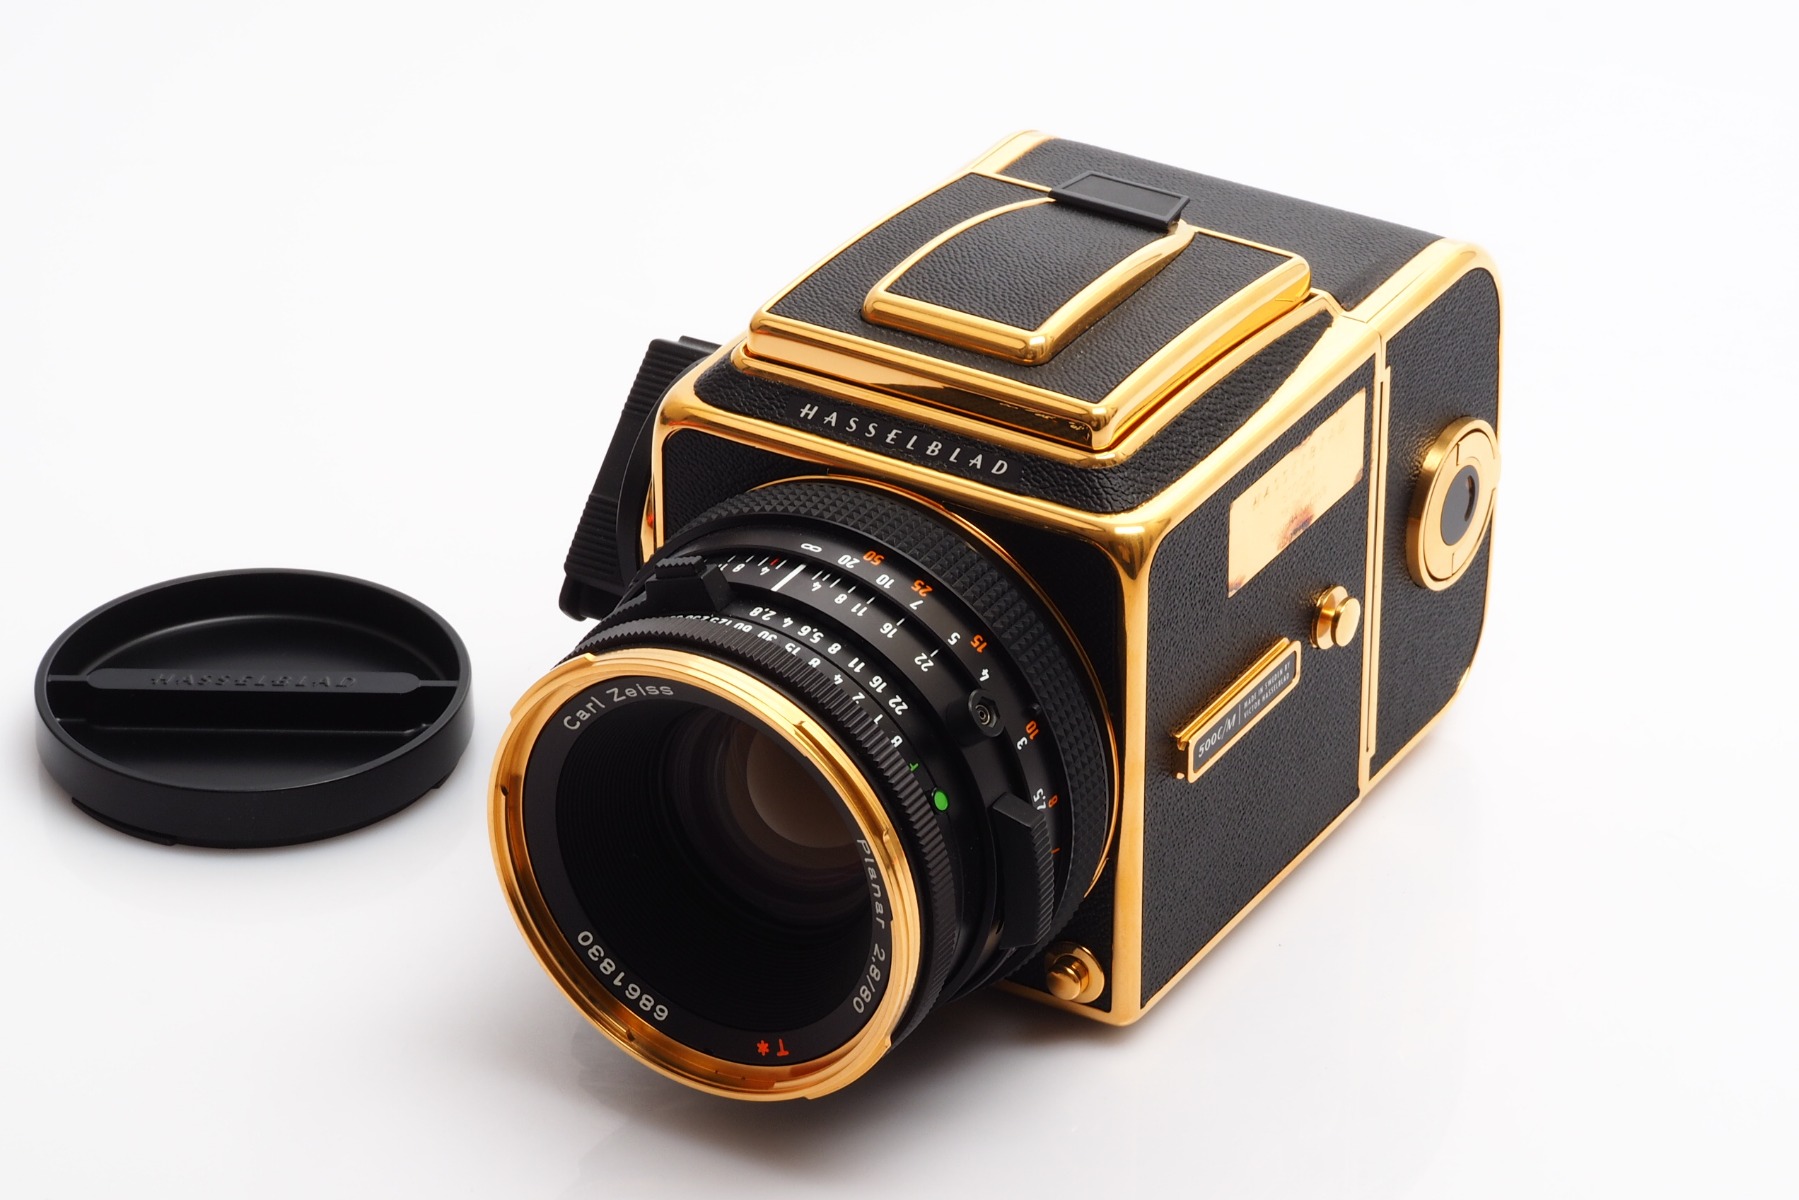 Hasselblad 500 / 501 / 503 V-System Cameras - WHICH ONE TO CHOOSE